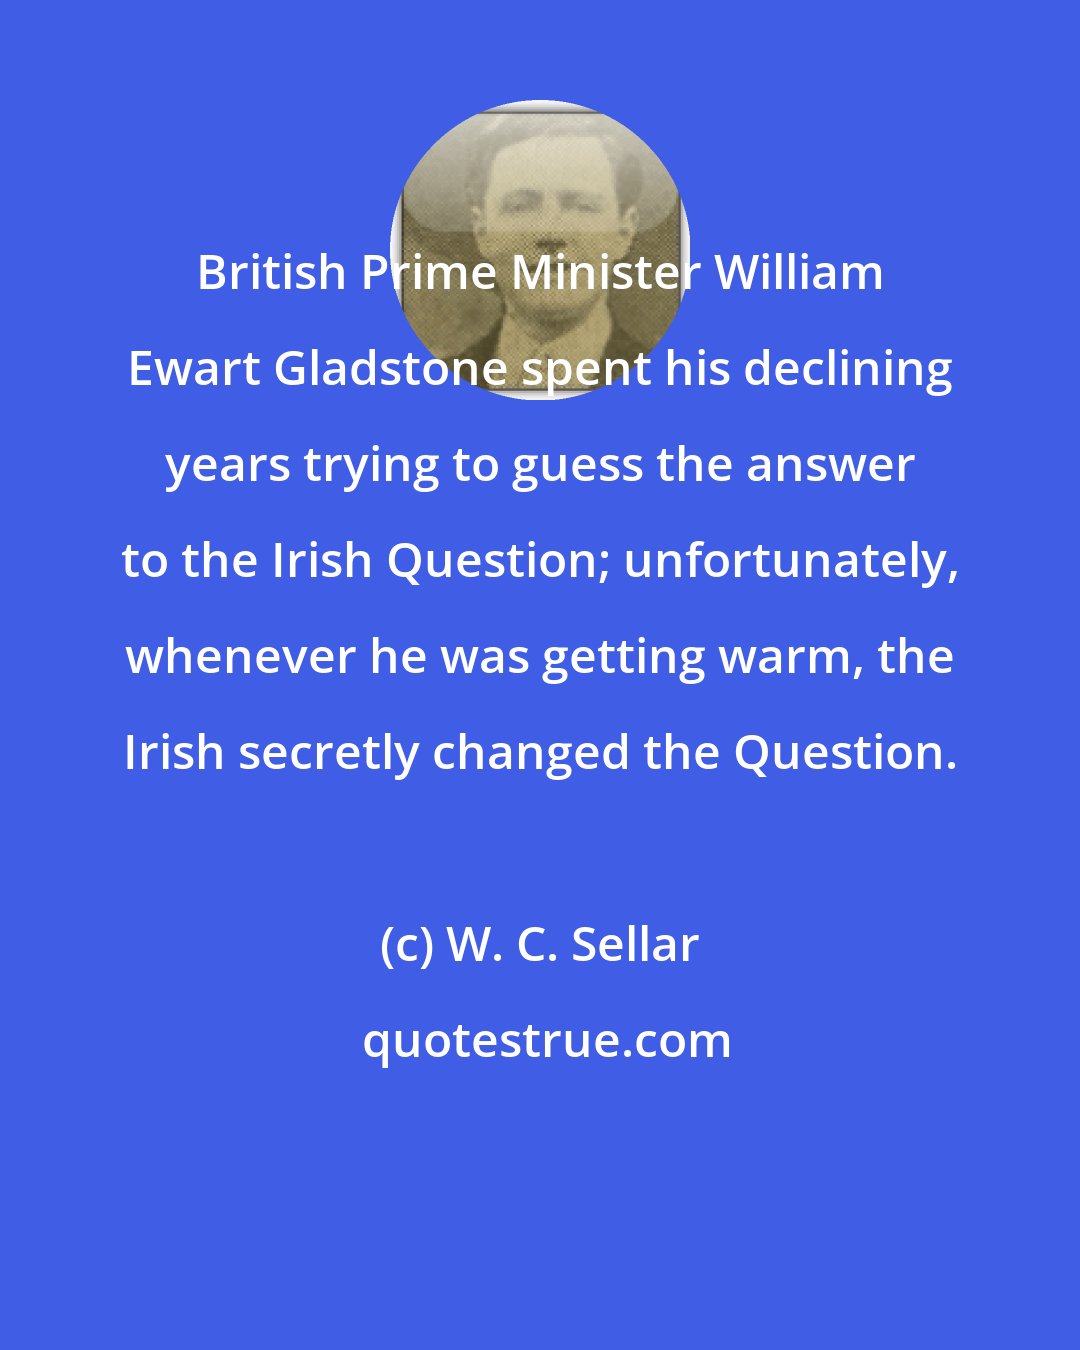 W. C. Sellar: British Prime Minister William Ewart Gladstone spent his declining years trying to guess the answer to the Irish Question; unfortunately, whenever he was getting warm, the Irish secretly changed the Question.